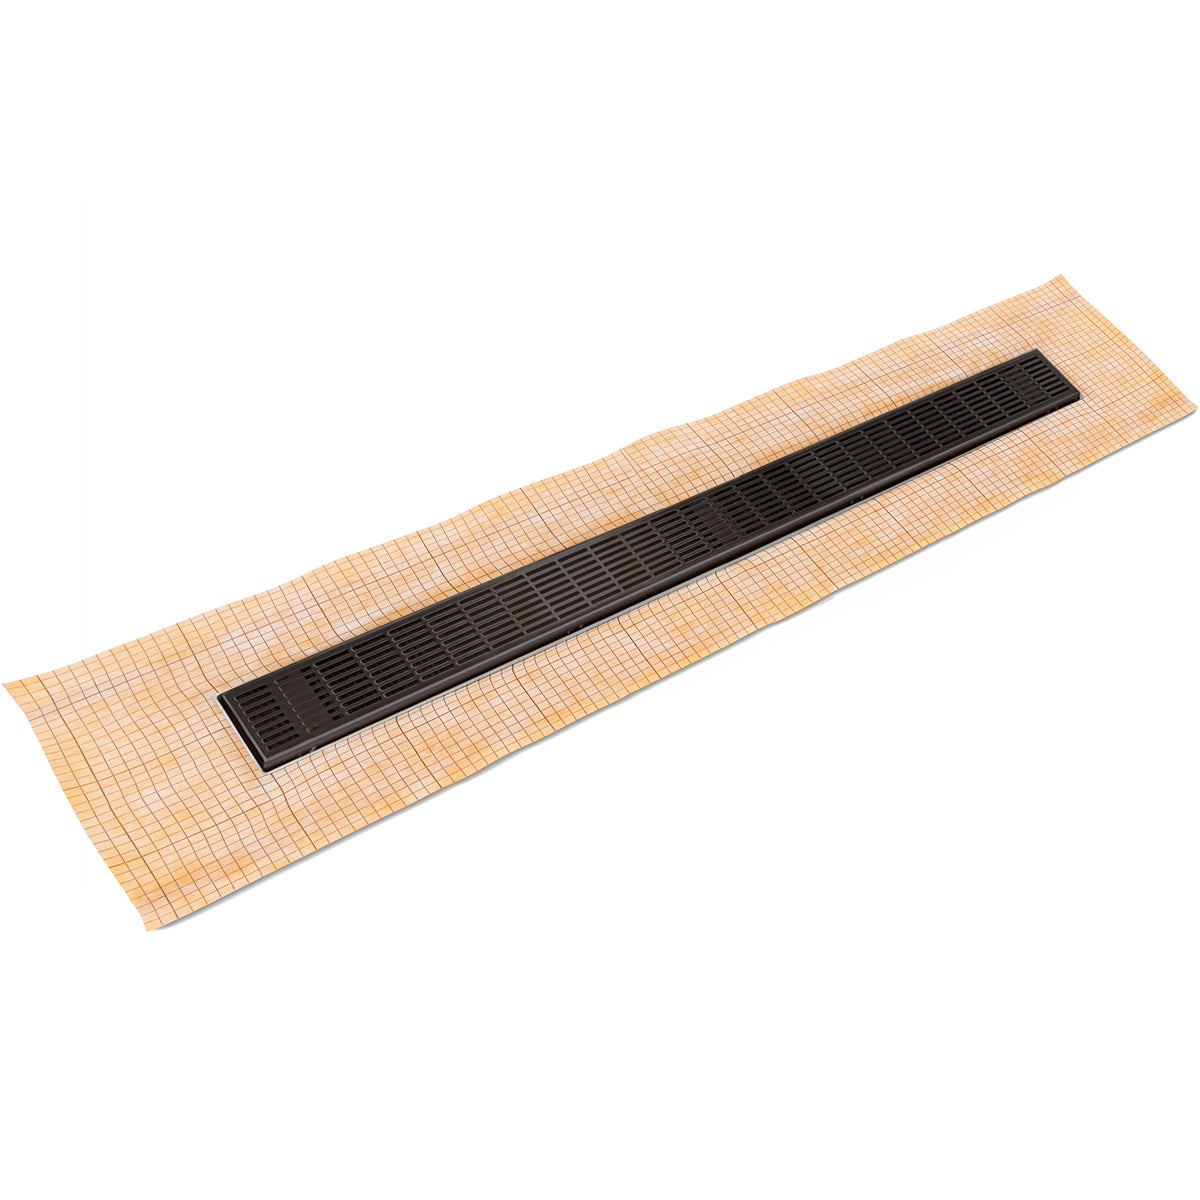 Infinity Drain 42" FCS Series Schluter-Kerdi - Fixed Flange Linear Drain Kit with 2 1/2" Perforated Slotted Grate